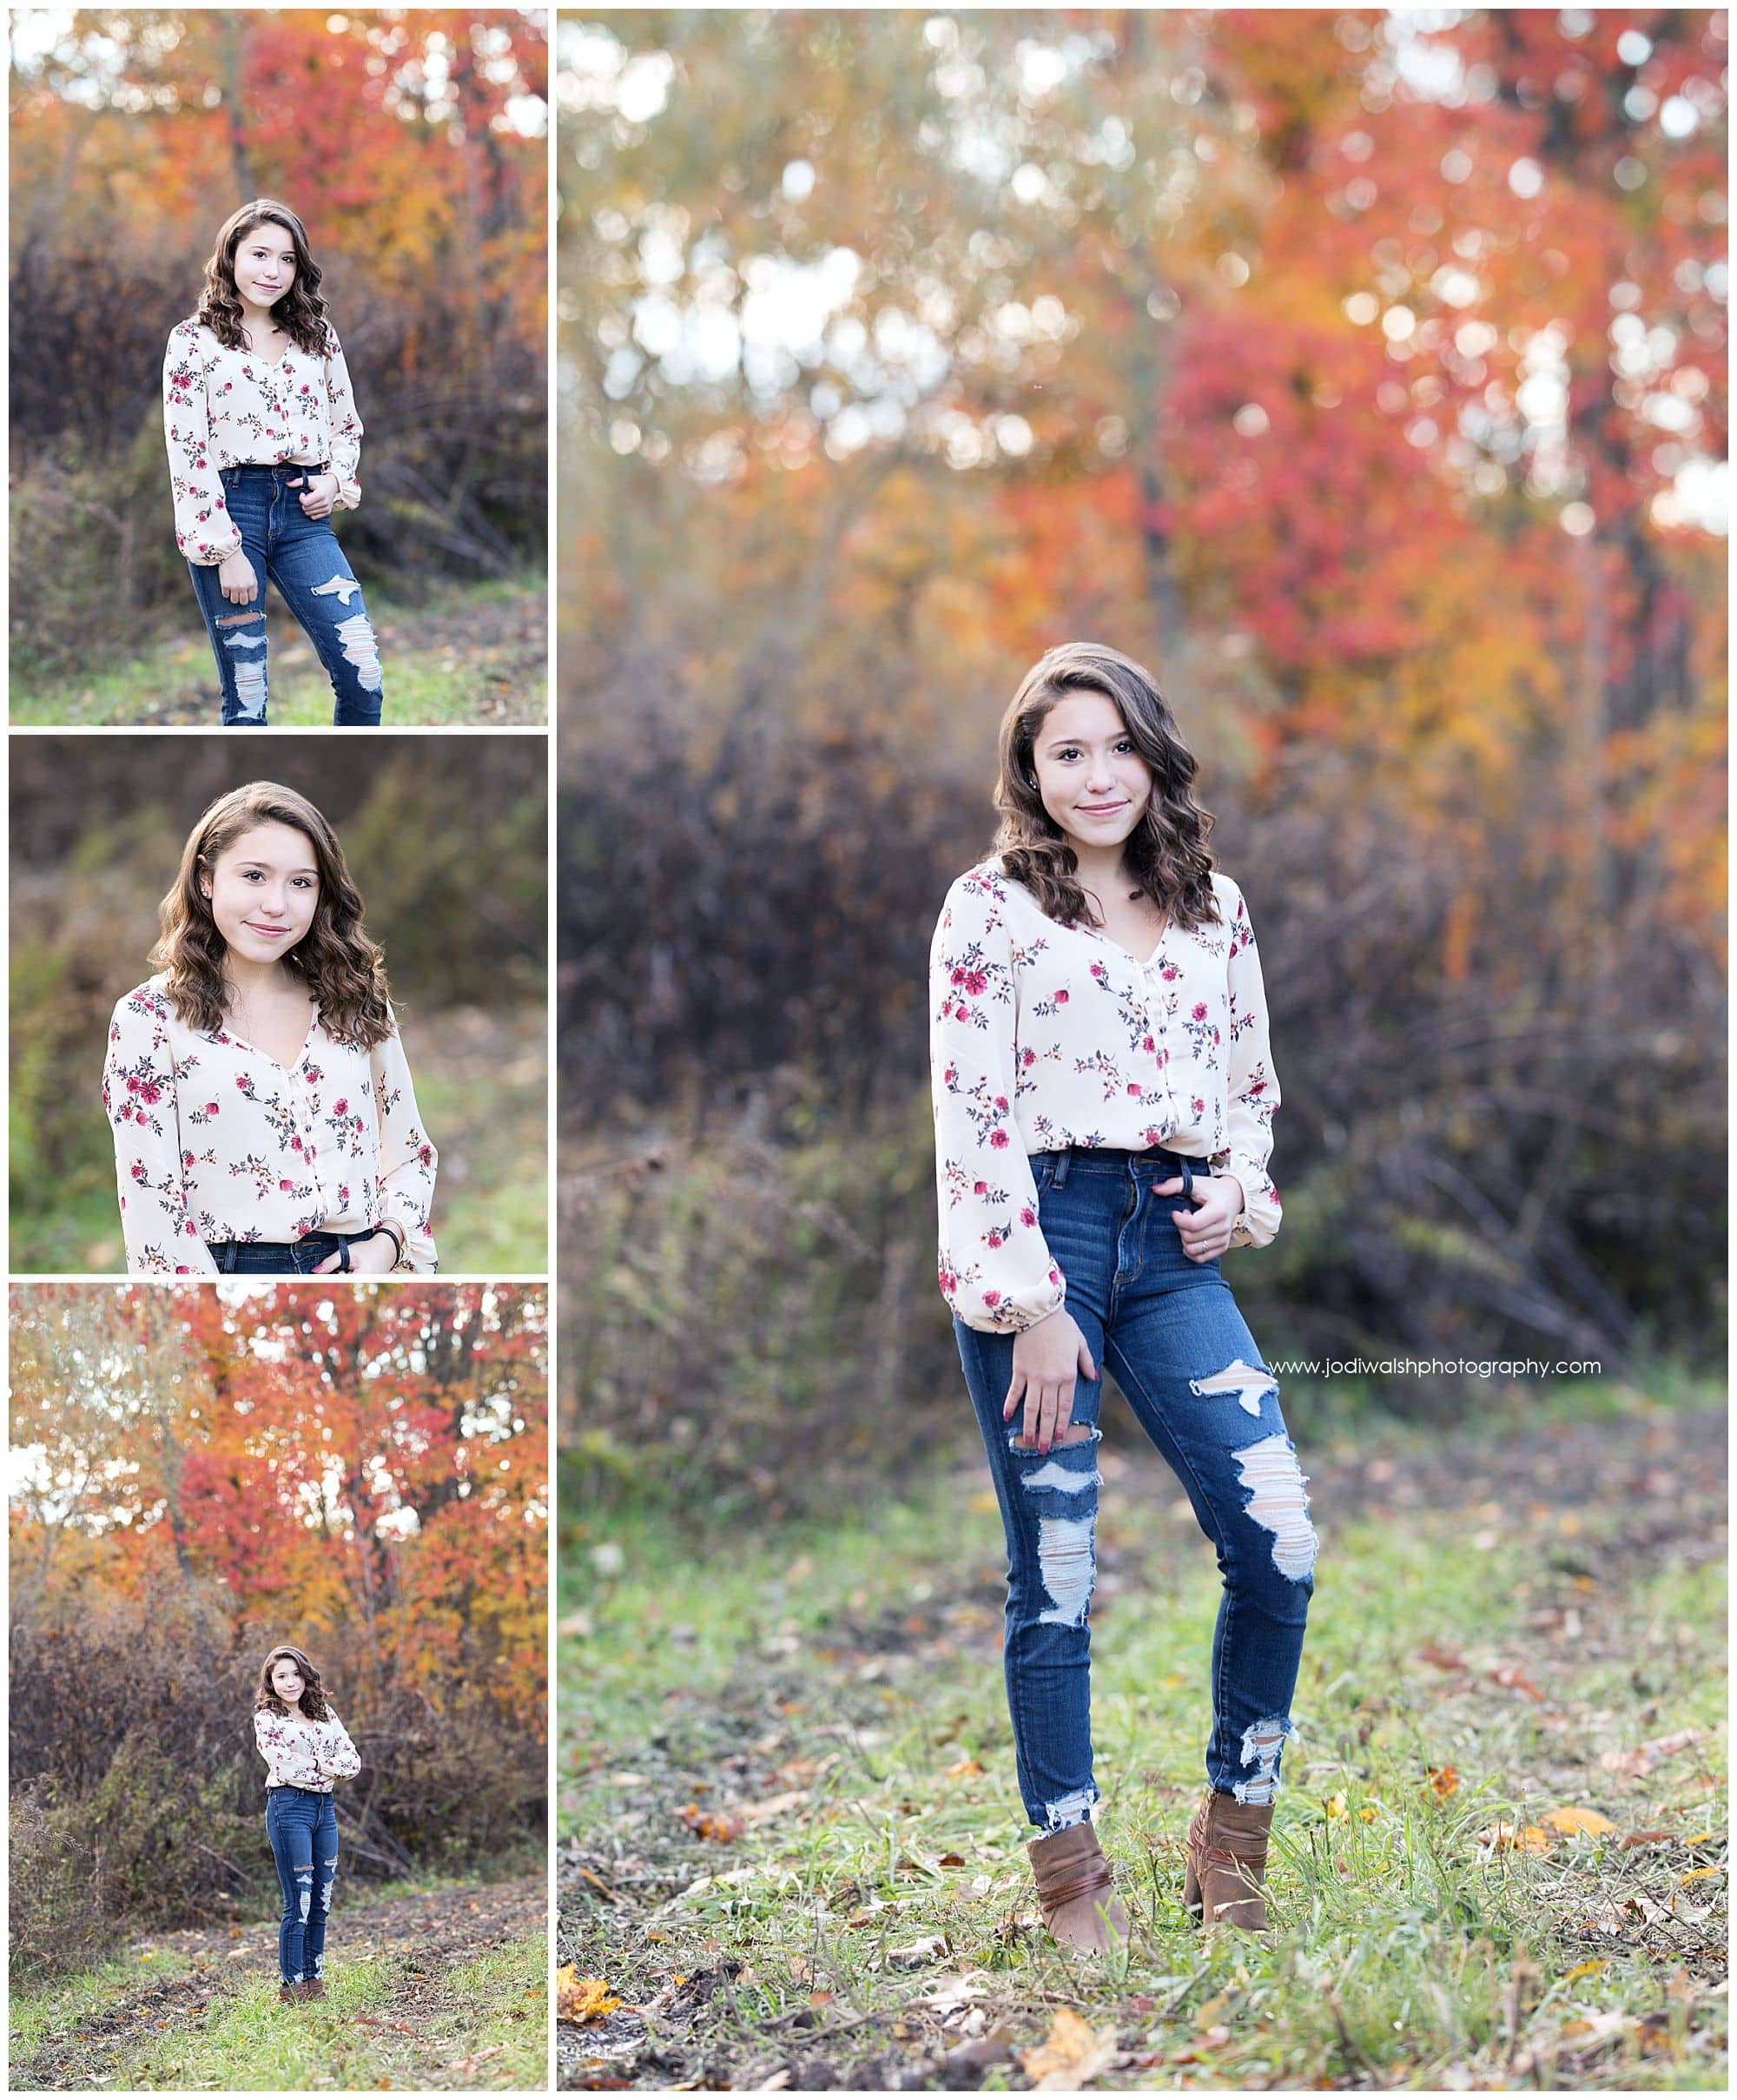 Pittsburgh area teen girl in blouse and ripped jeans with fall leaves